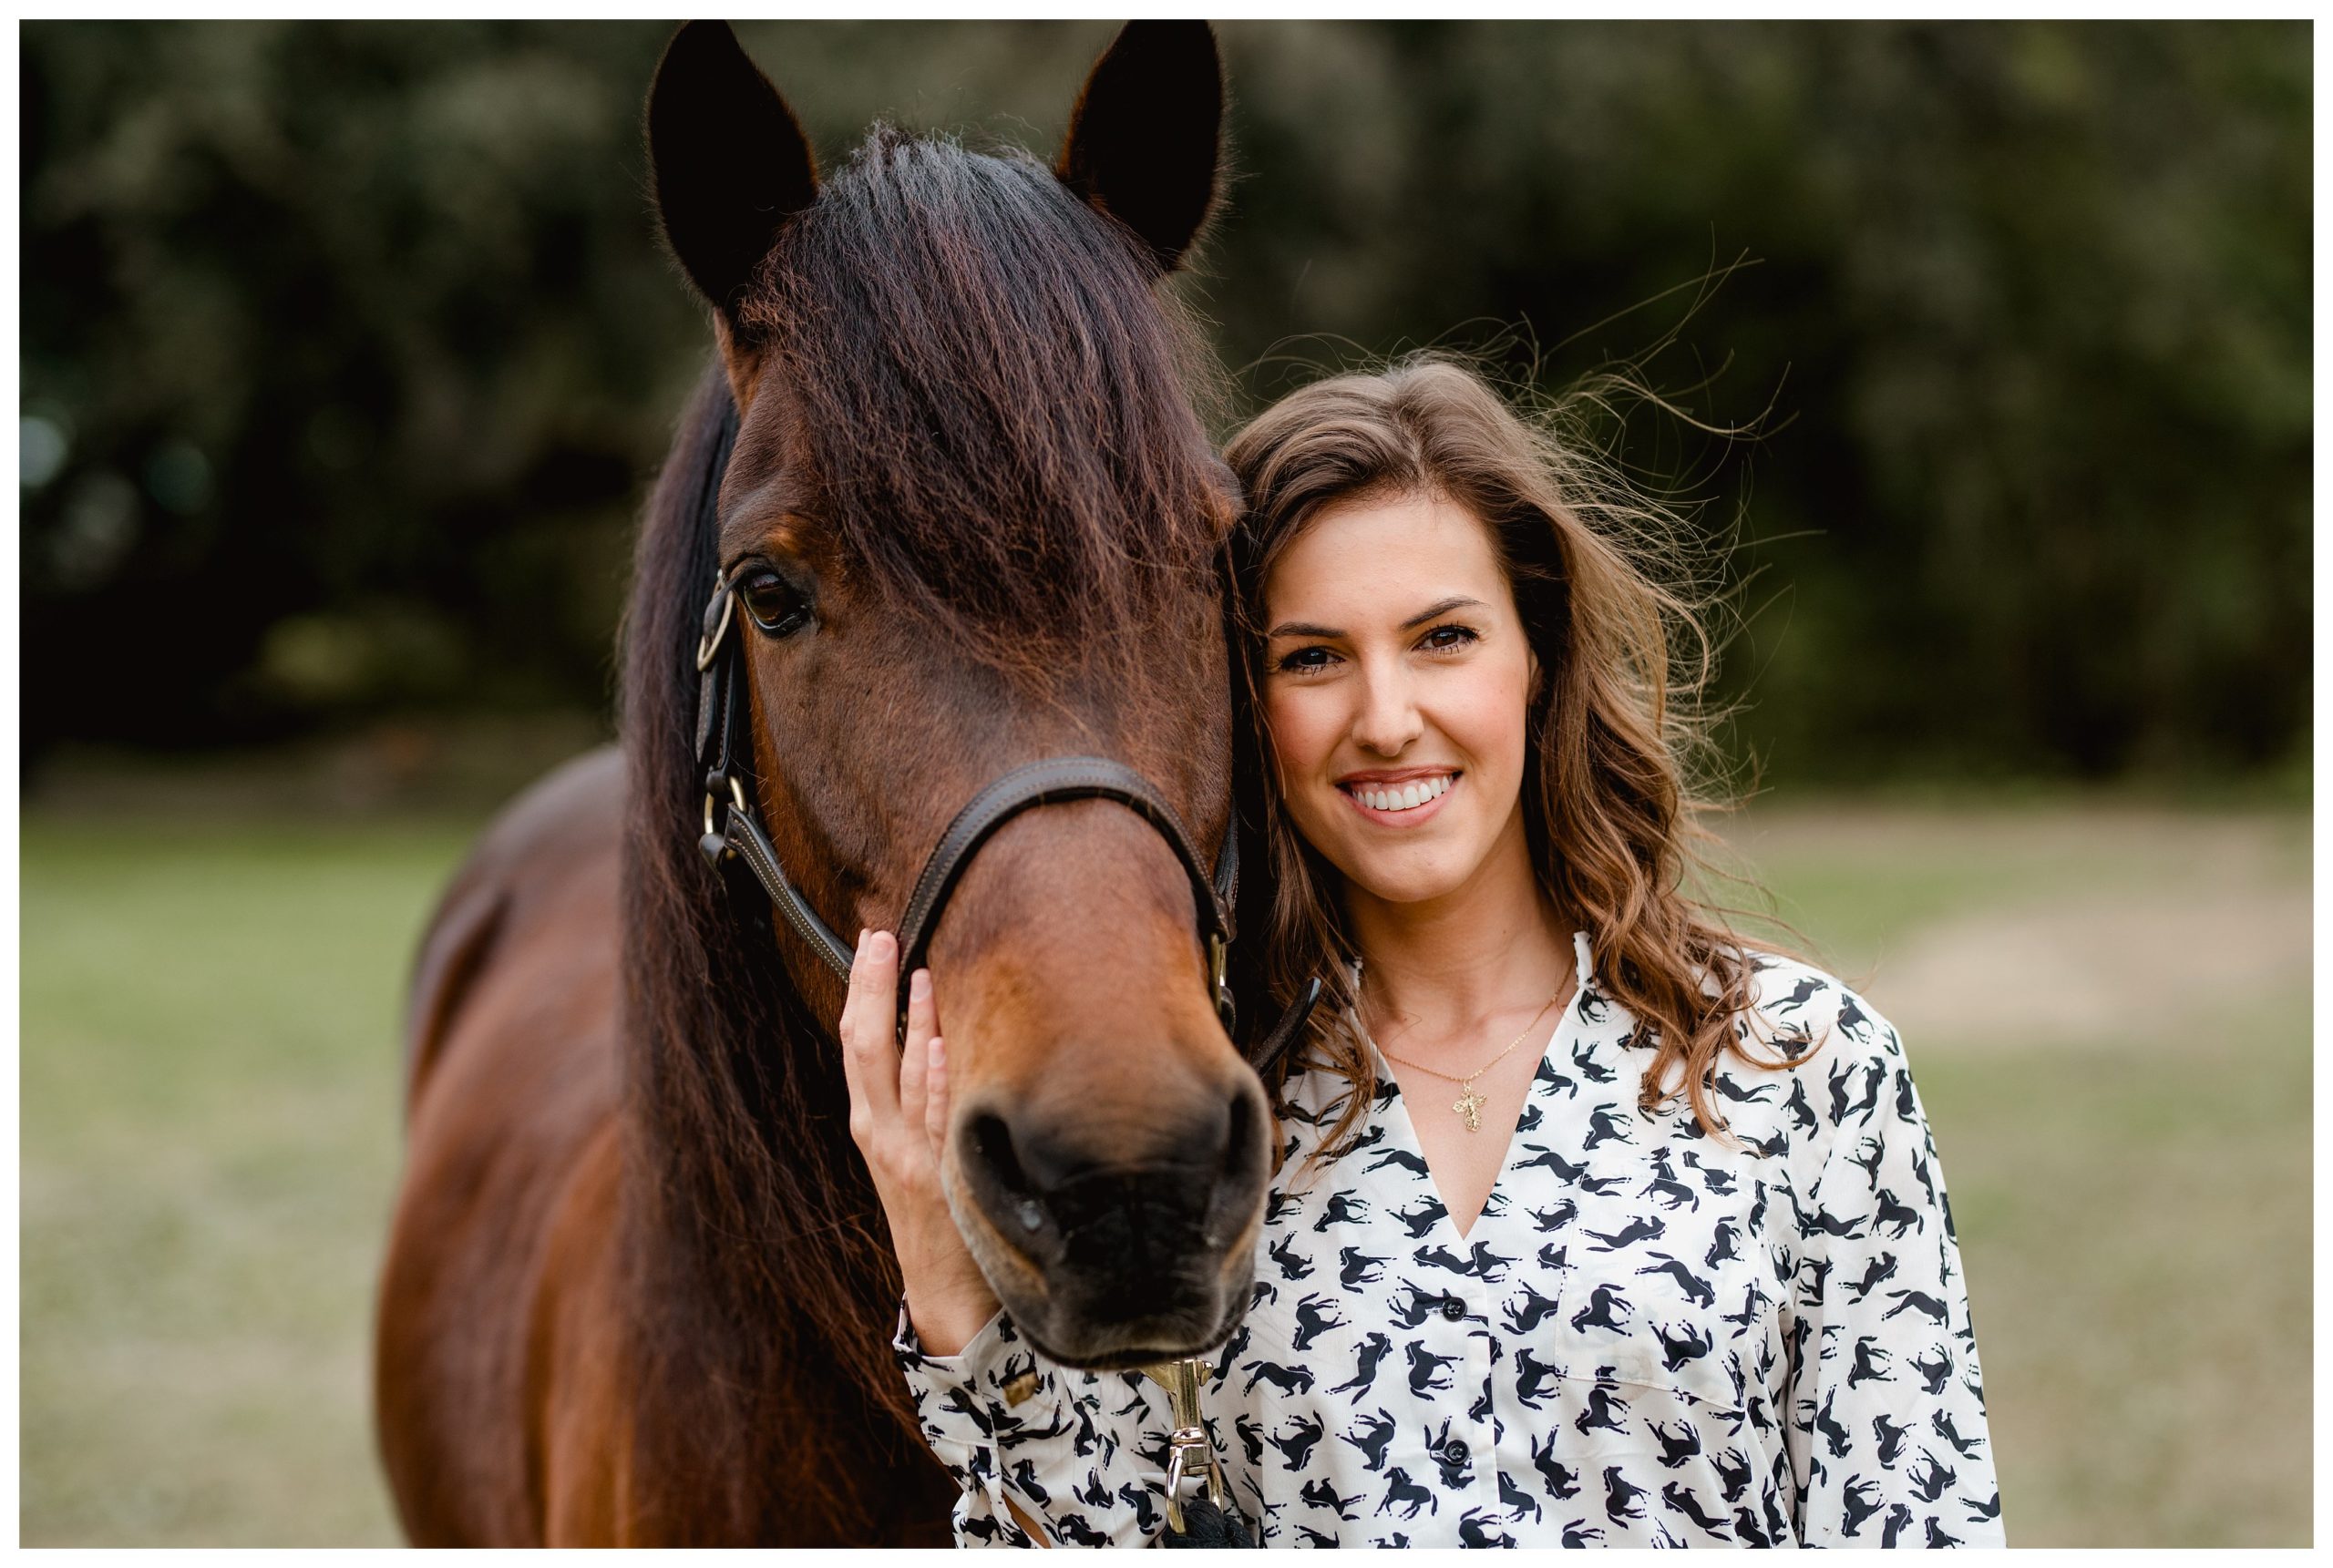 Professional photo shoot with horse pictures and equestrian blogger in Florida.